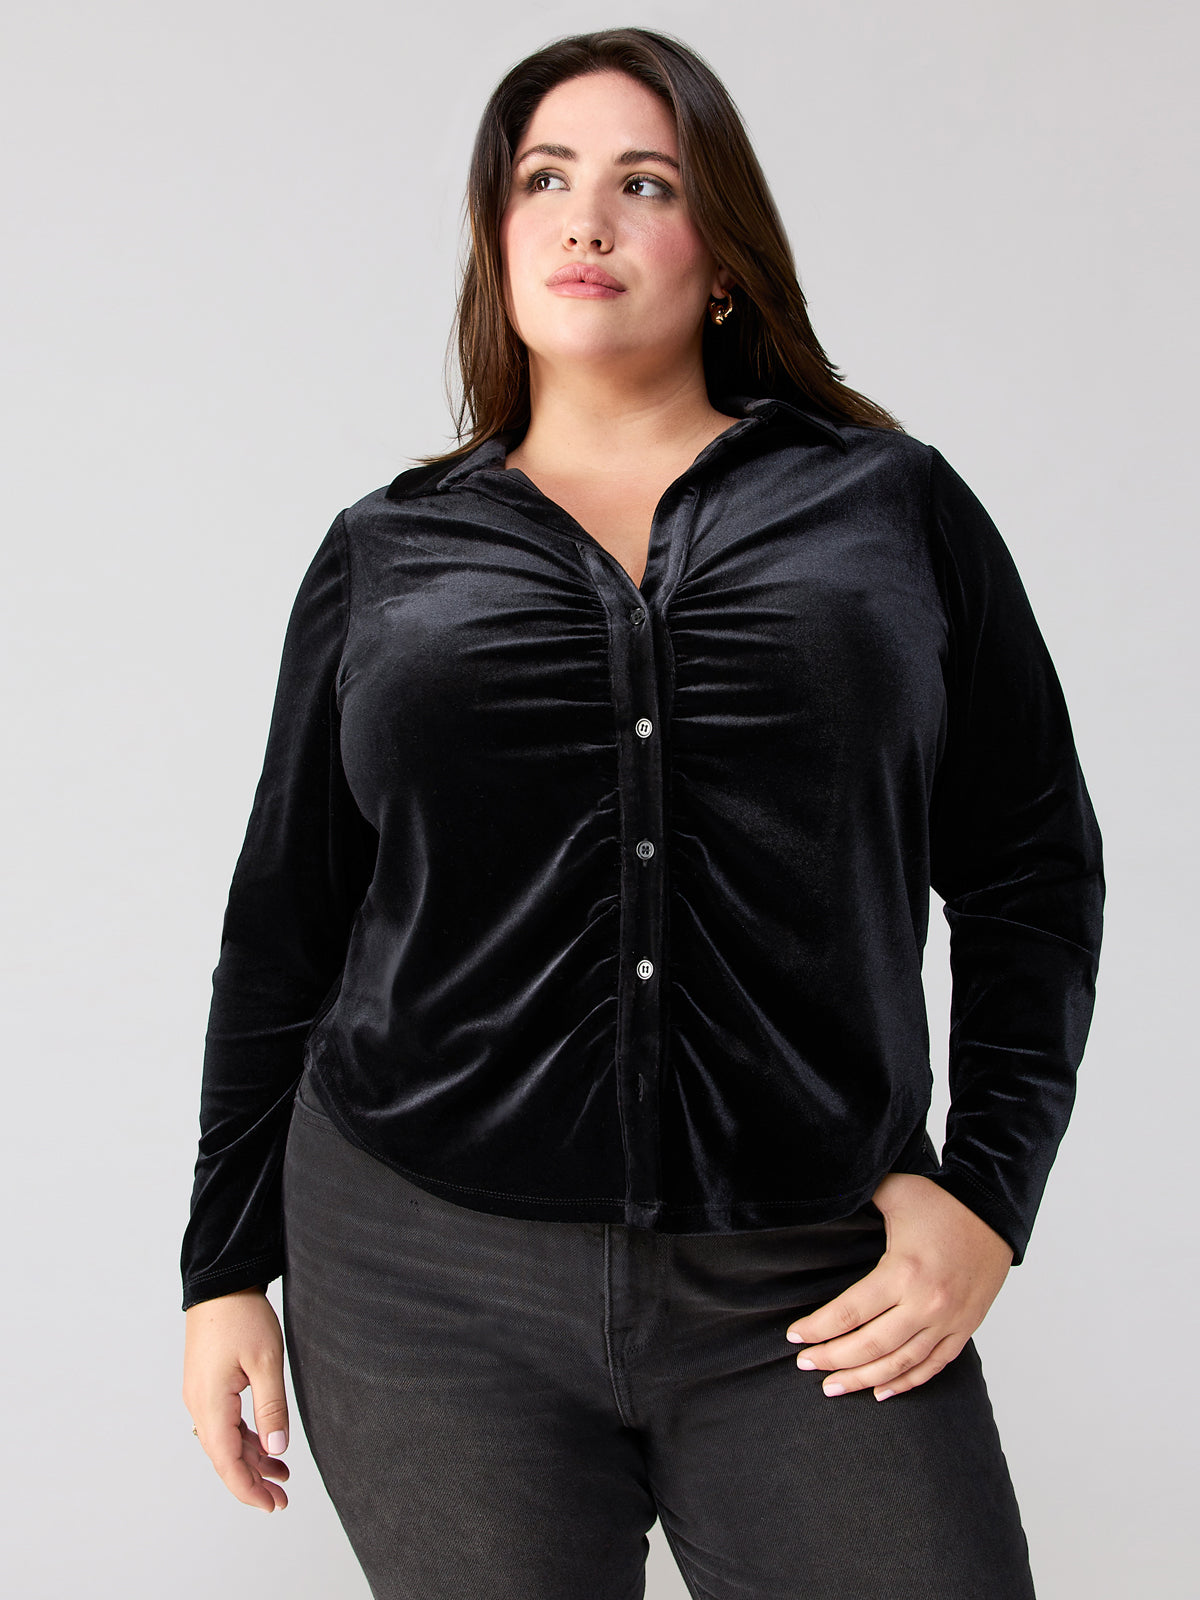 Dreamgirl Velvet Button Up Top Black Inclusive Collection